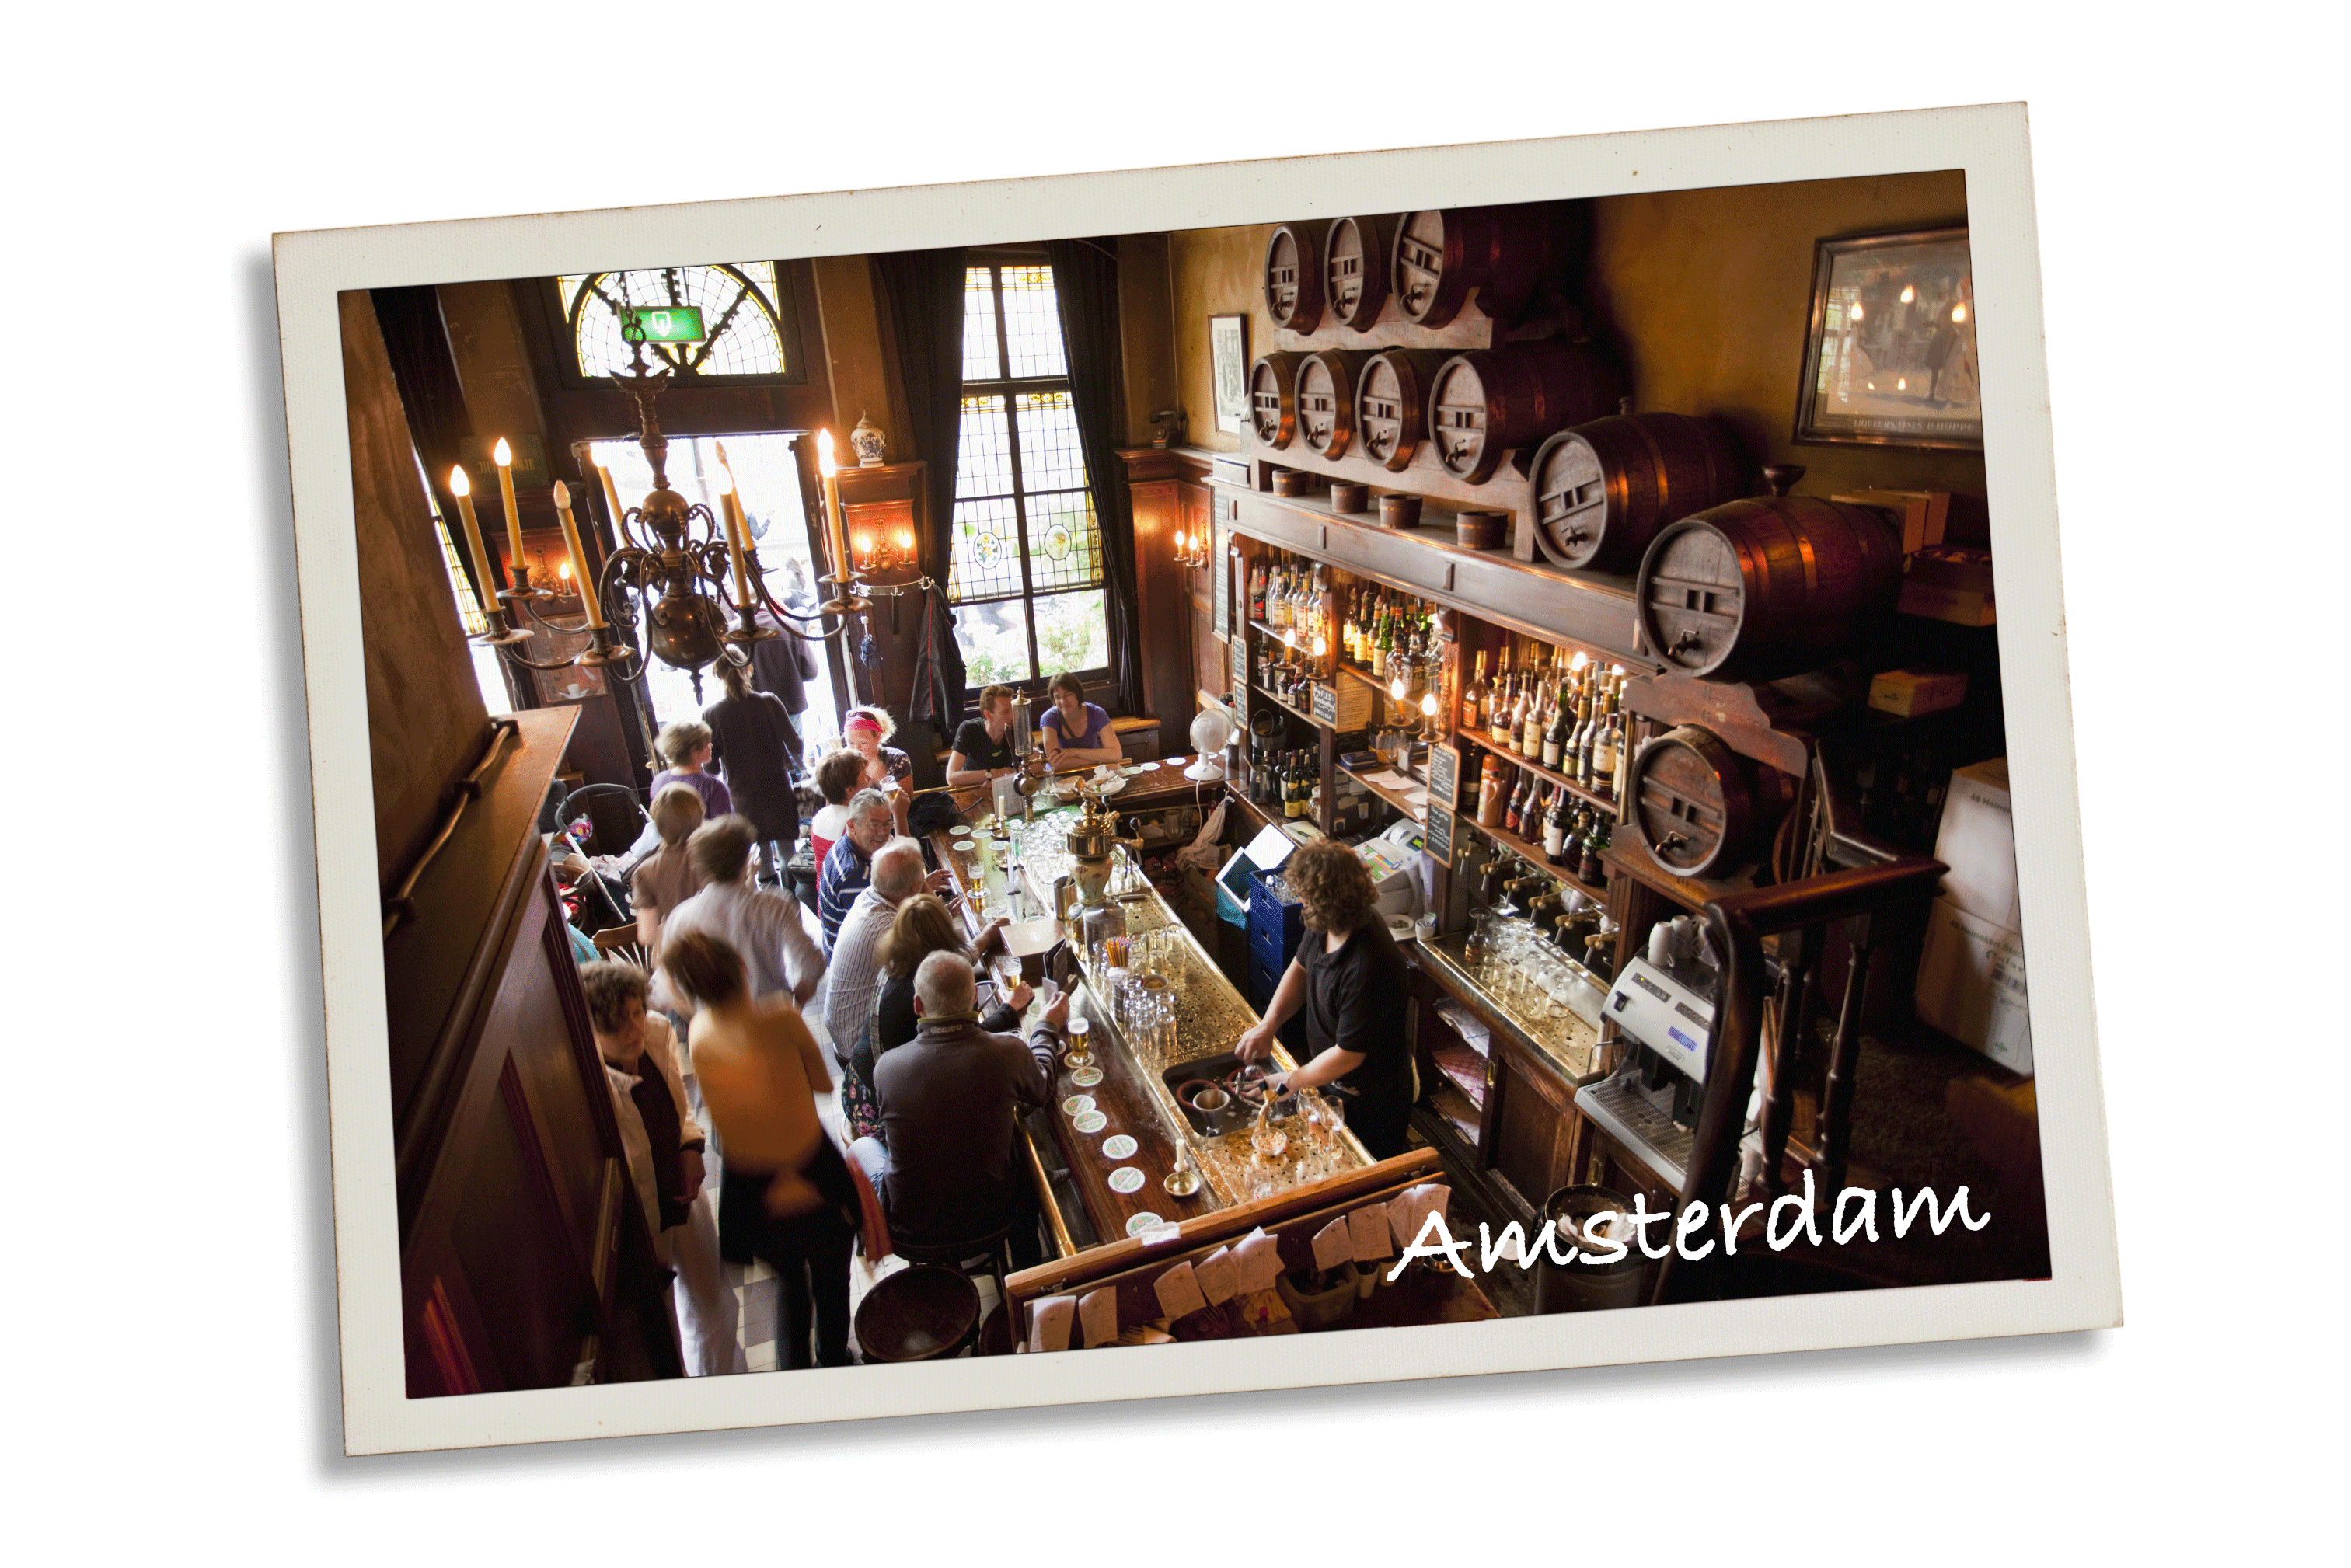 (Amsterdam) Brown Cafe, pub called Het Smalle, Amsterdam, The Netherlands; (Budapest) The Szimpla Kert one of the oldest and most famous Ruin-pubs in Budapest, Hungary.